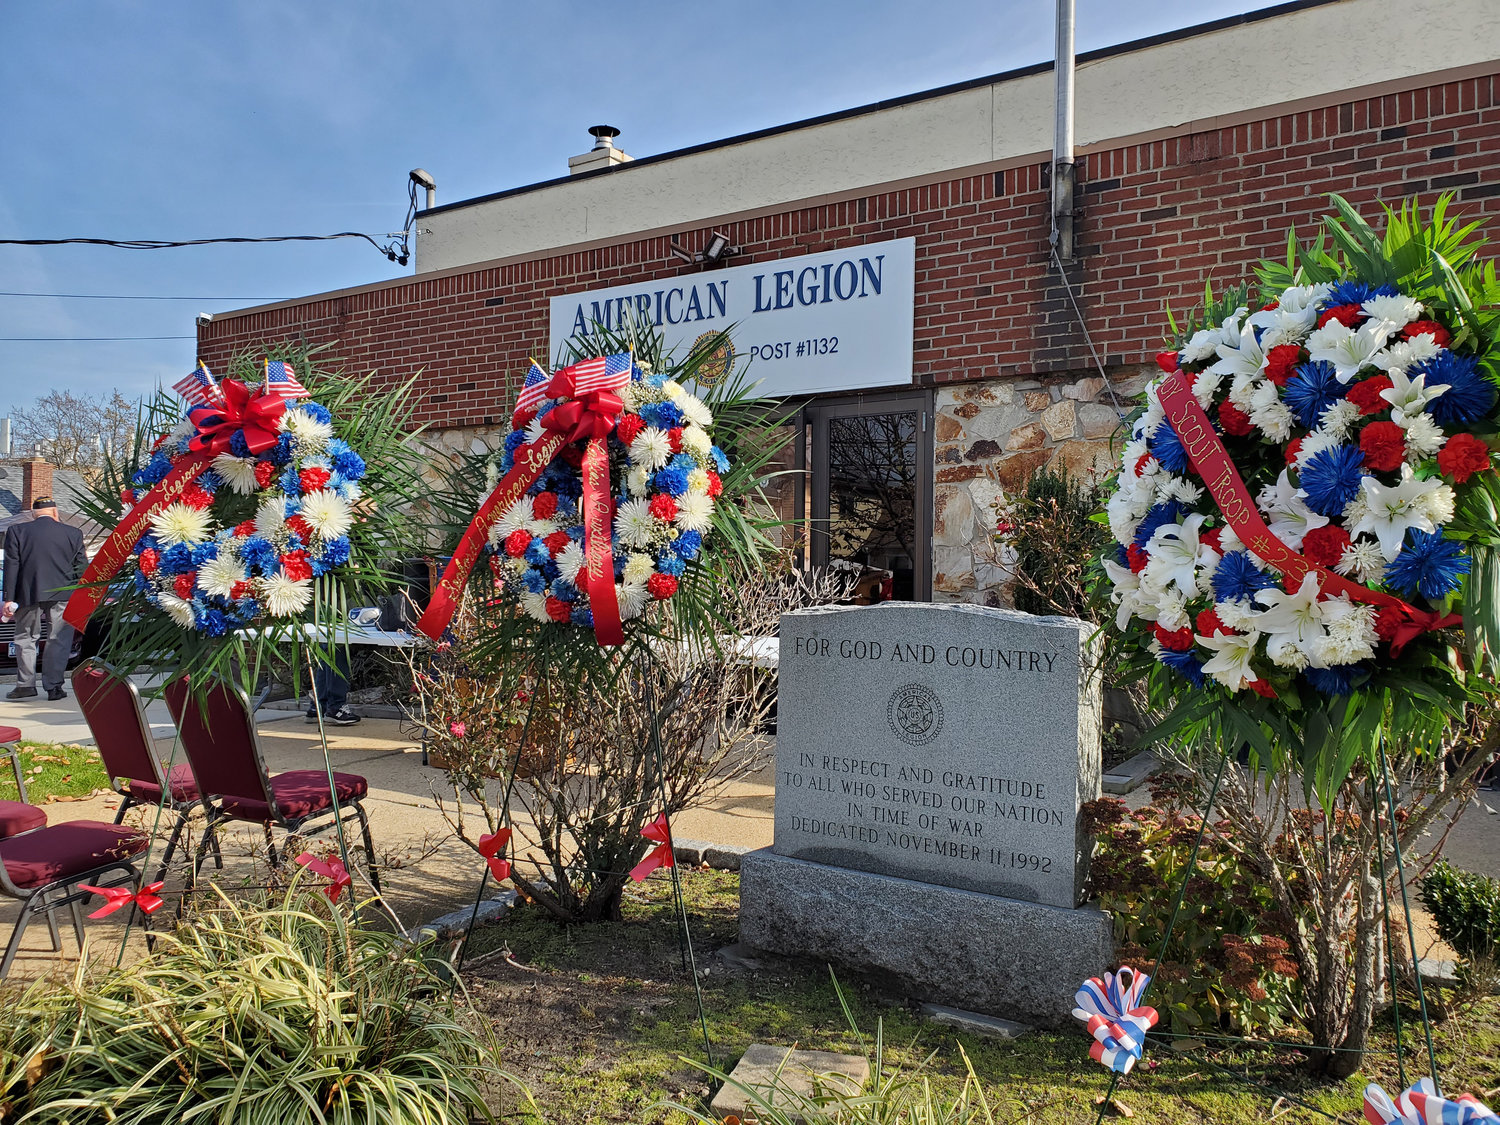 Wreaths decorated the front lawn of the Seaford American Legion Post #1132 on Veterans Day.